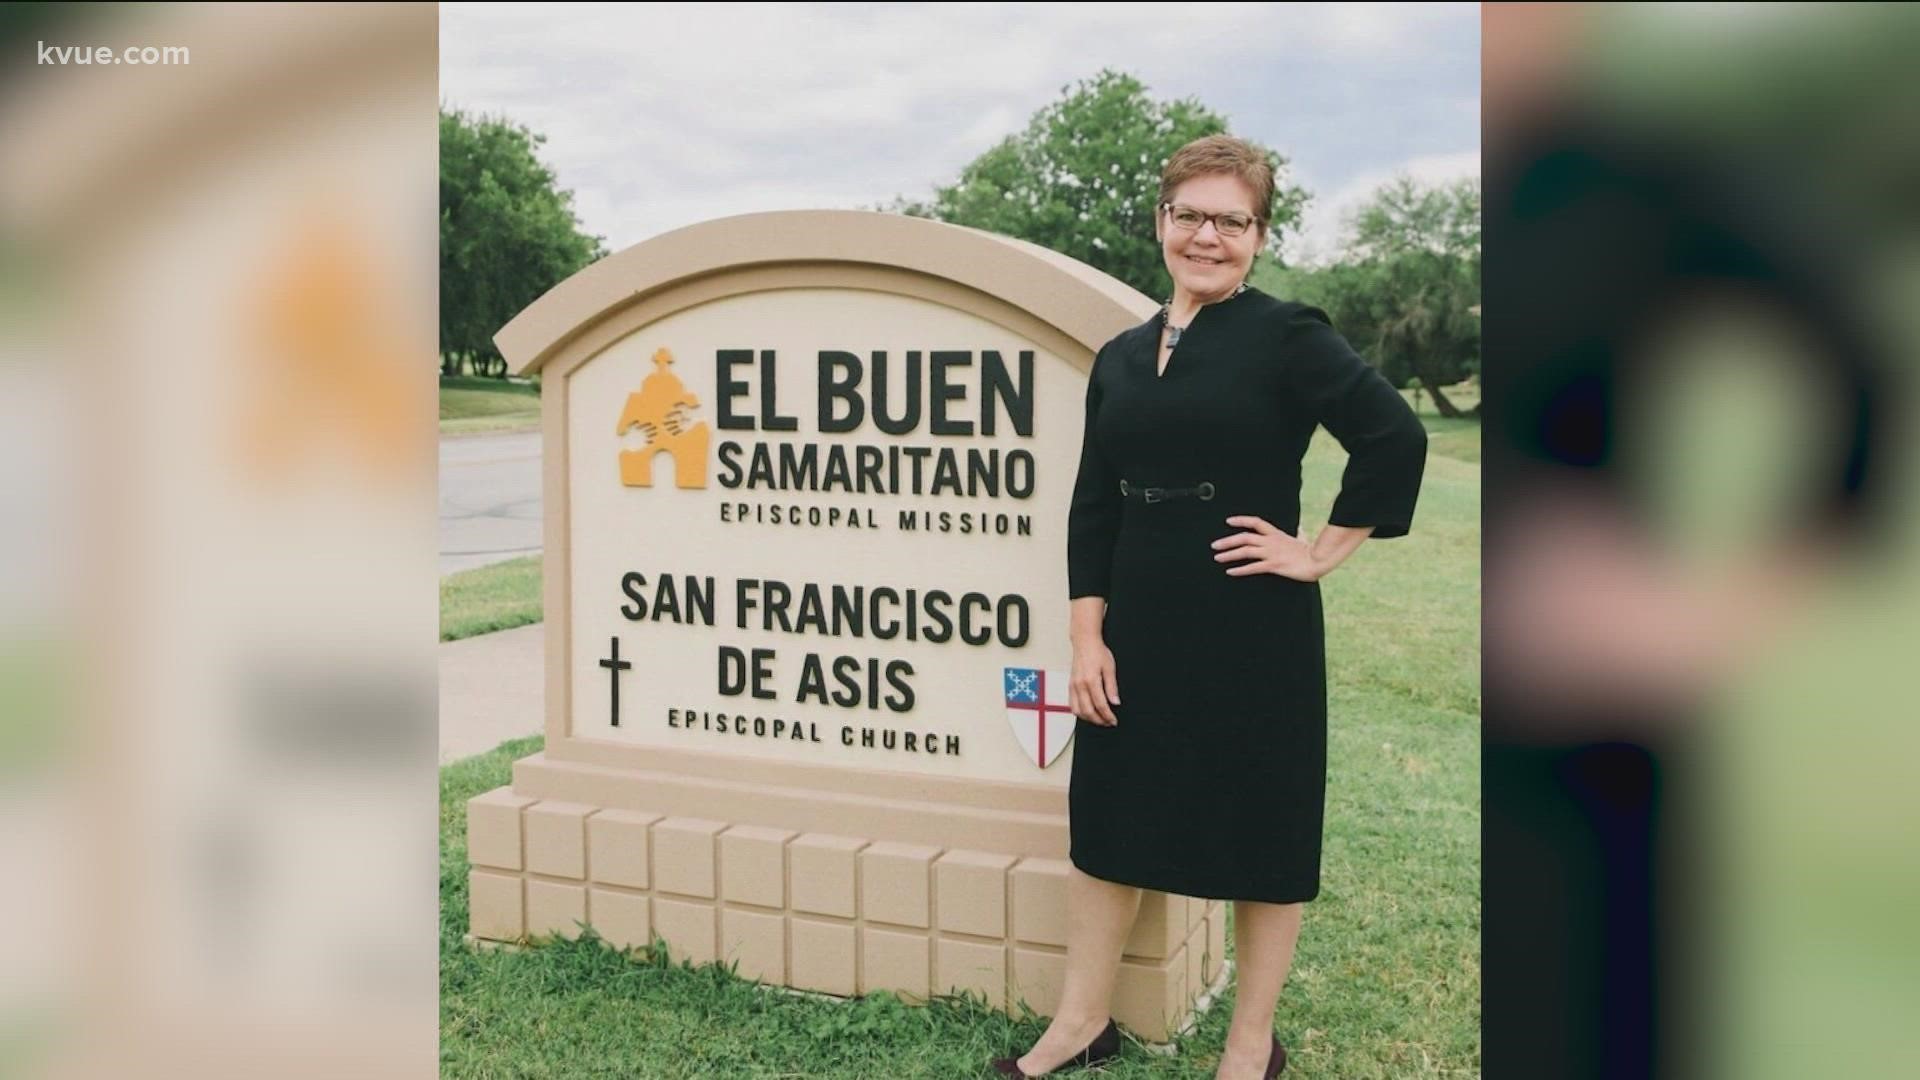 Dr. Rosamaria Murillo is the chief executive officer of El Buen Samaritano, an outreach ministry that serves the Latino community of Central Texas.